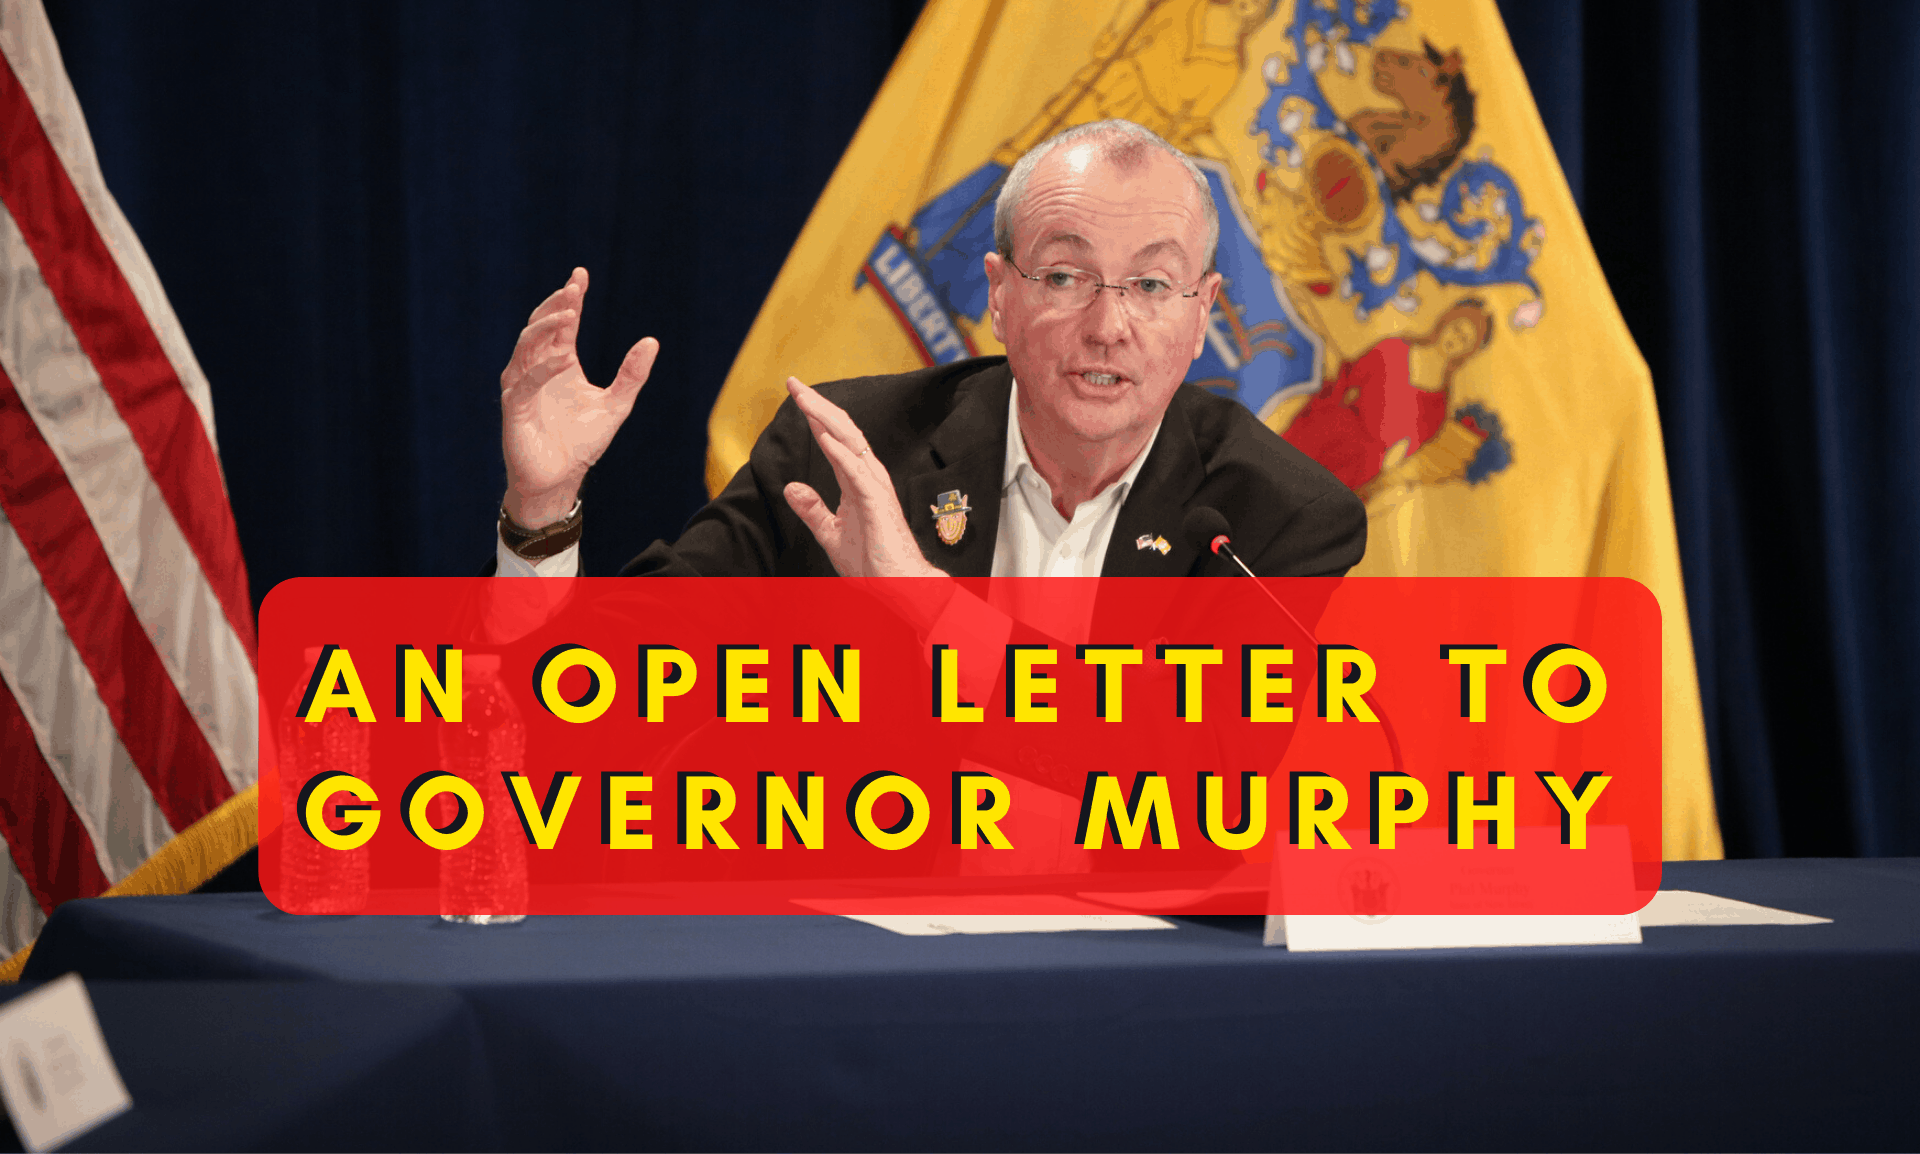 An Open Letter To Governor Murphy